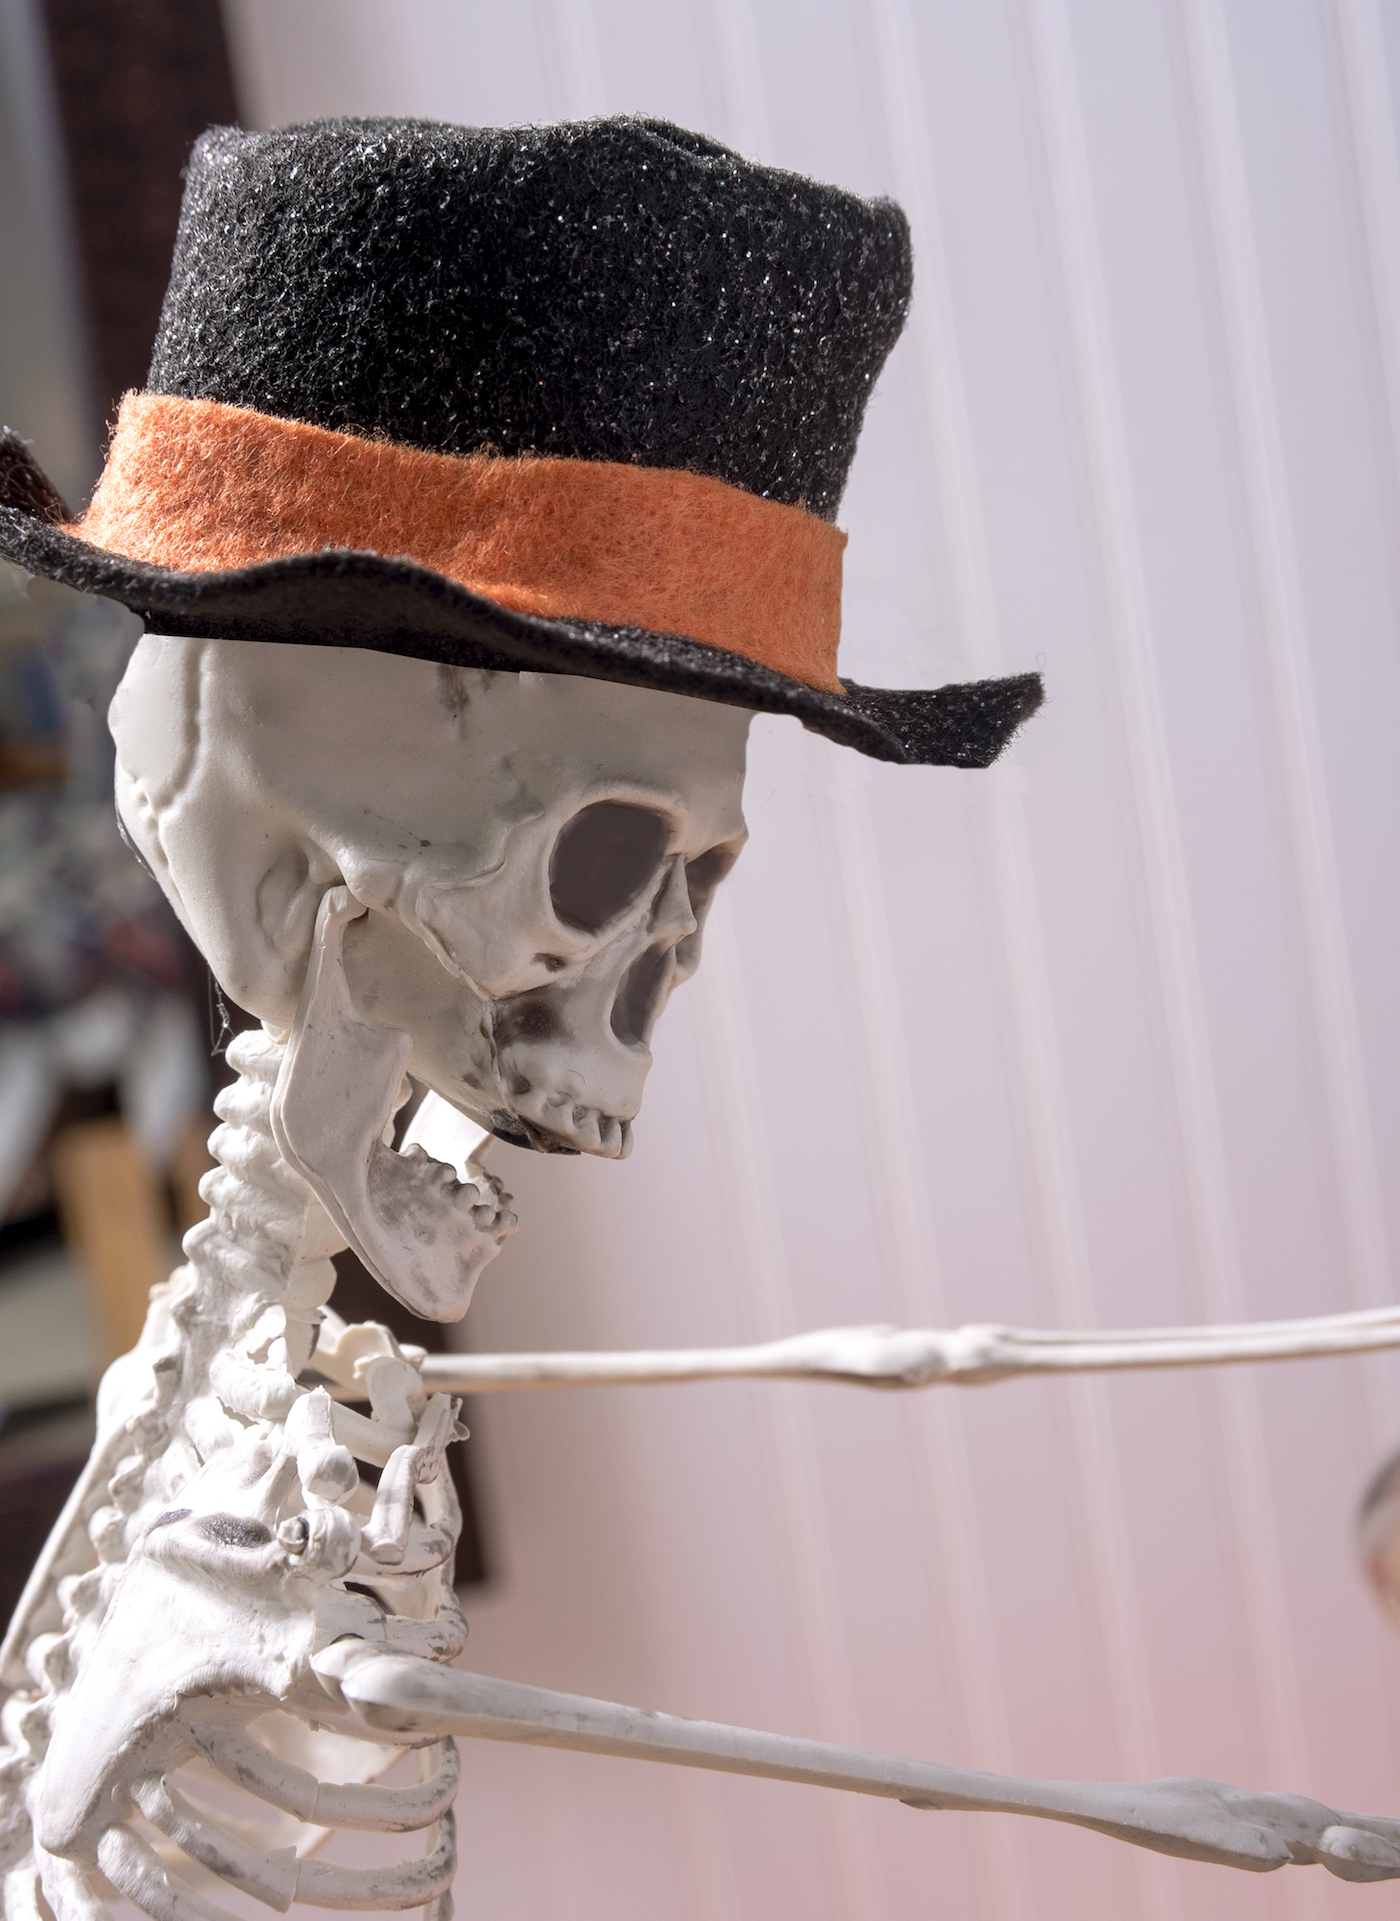 Close up of the skeleton wearing a hat